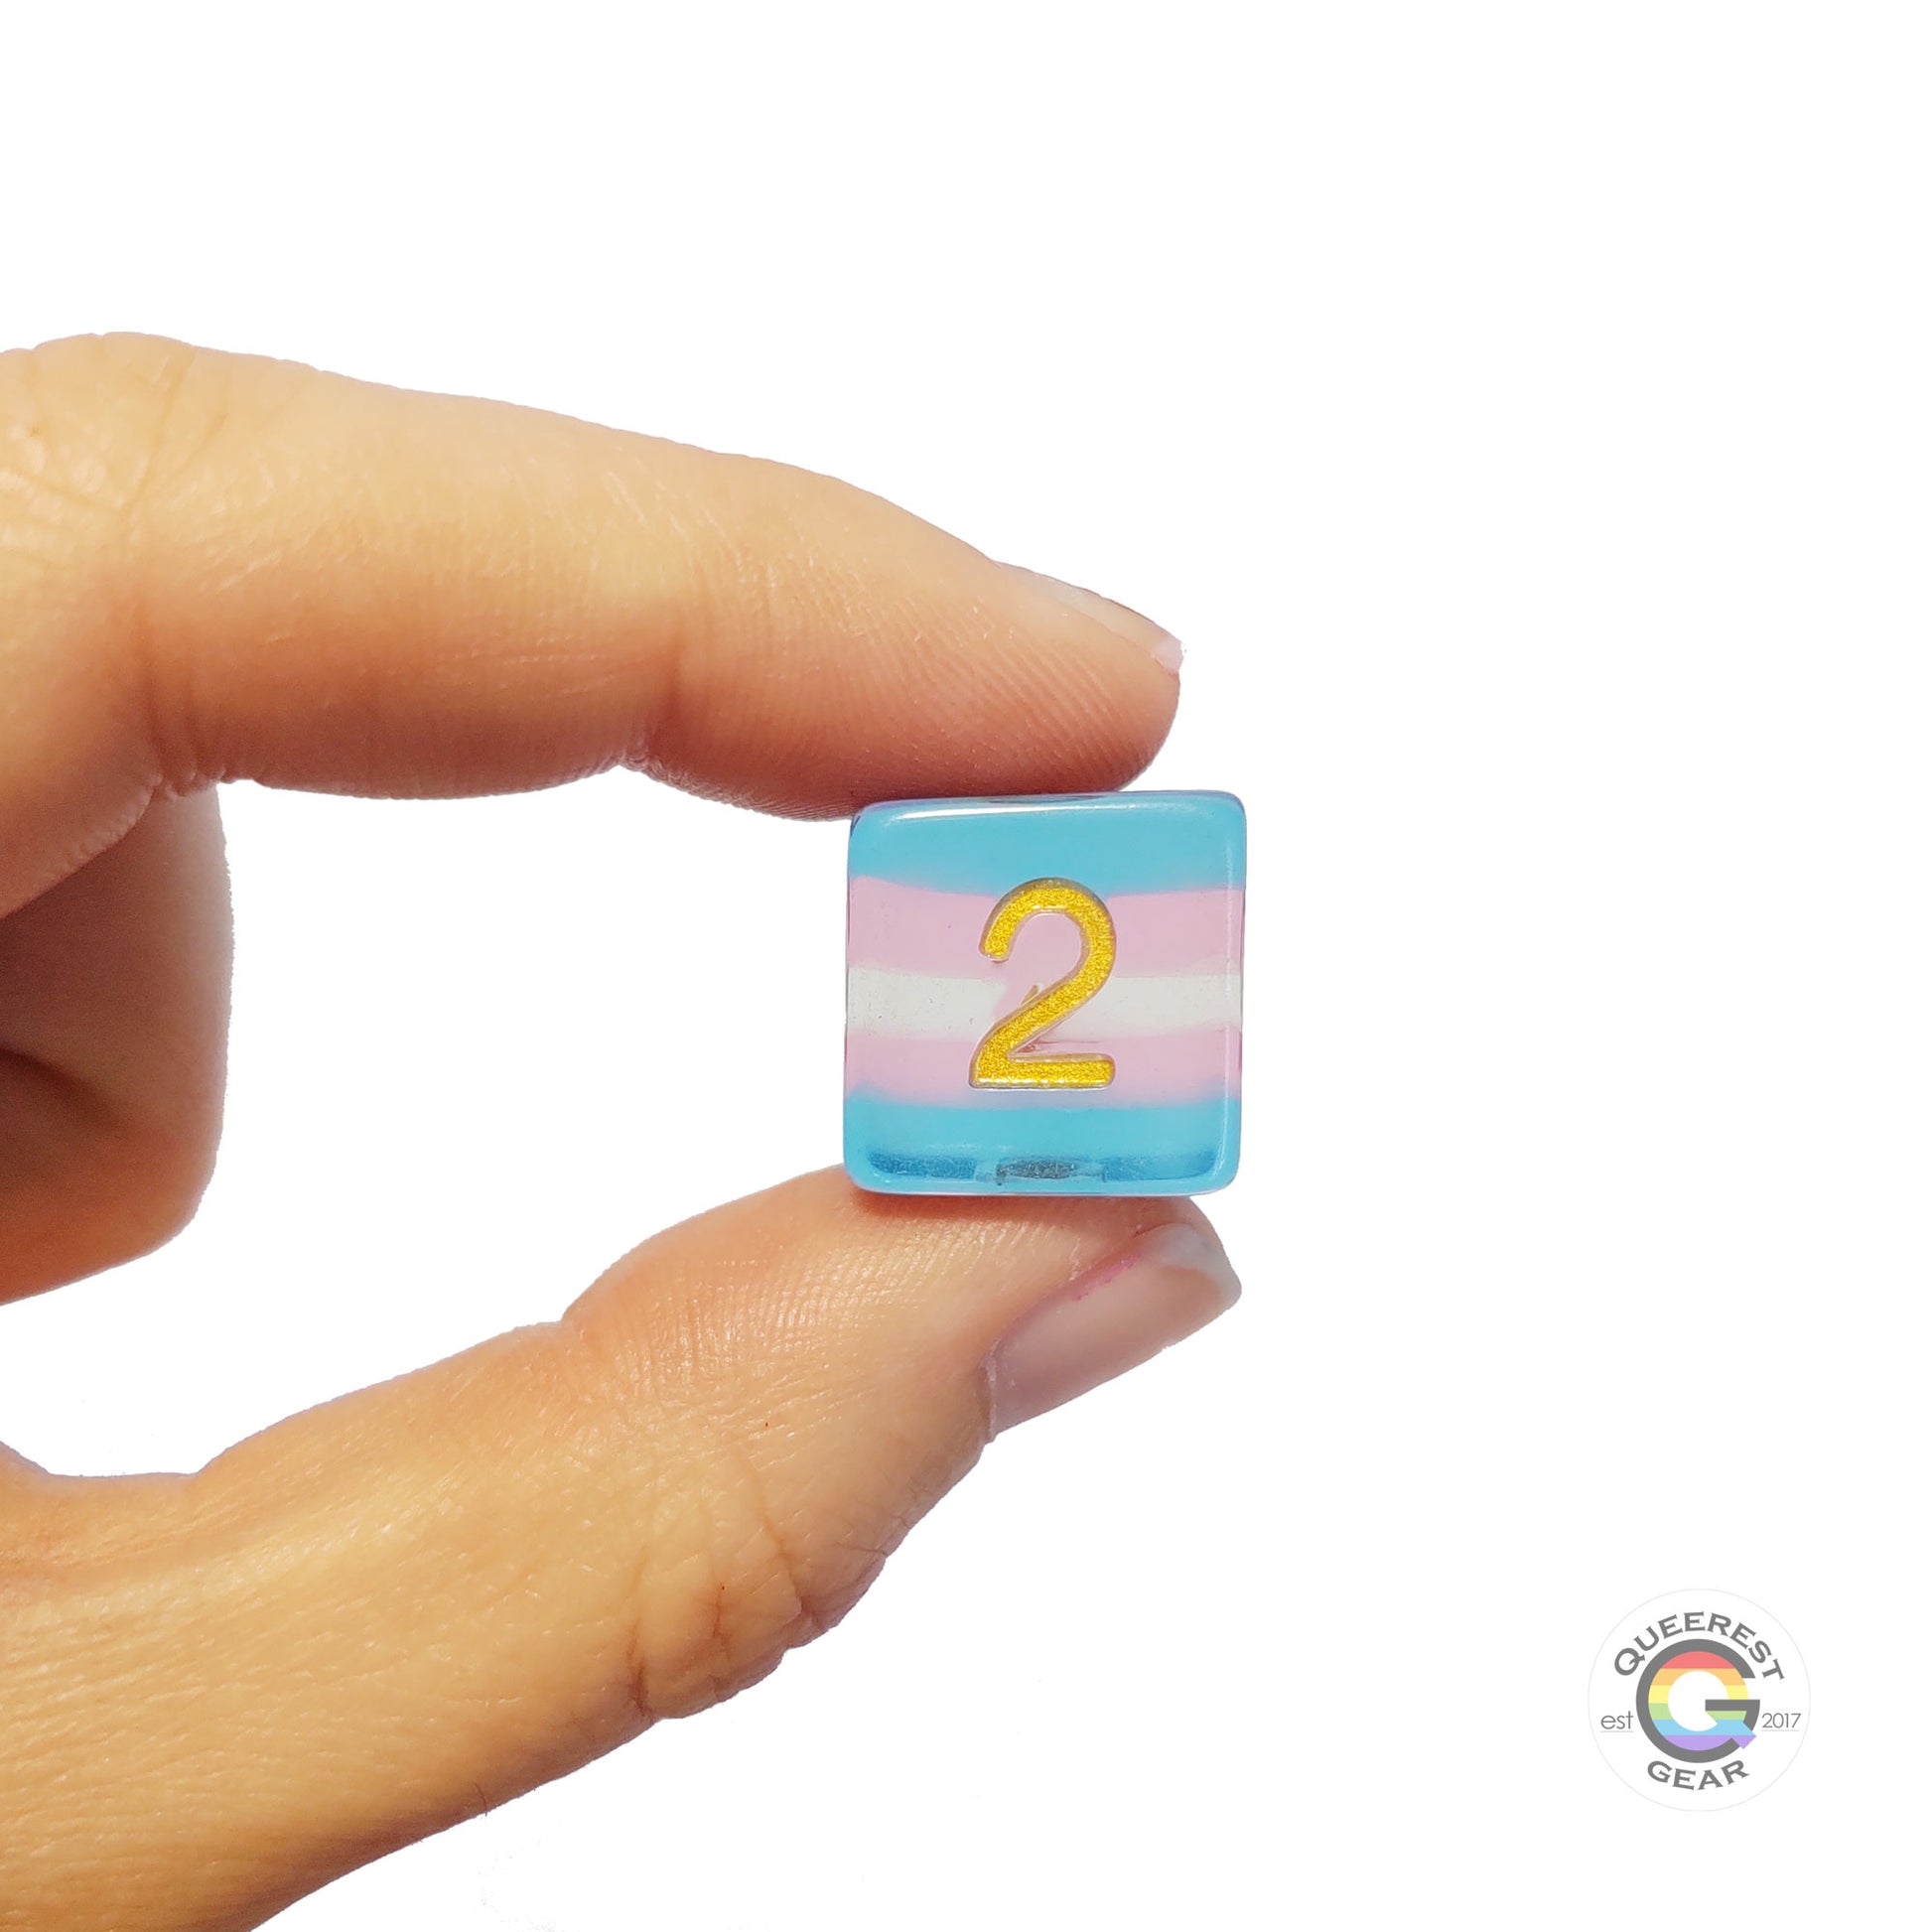 A hand holding up the transgender d6 to show off the color and transparency